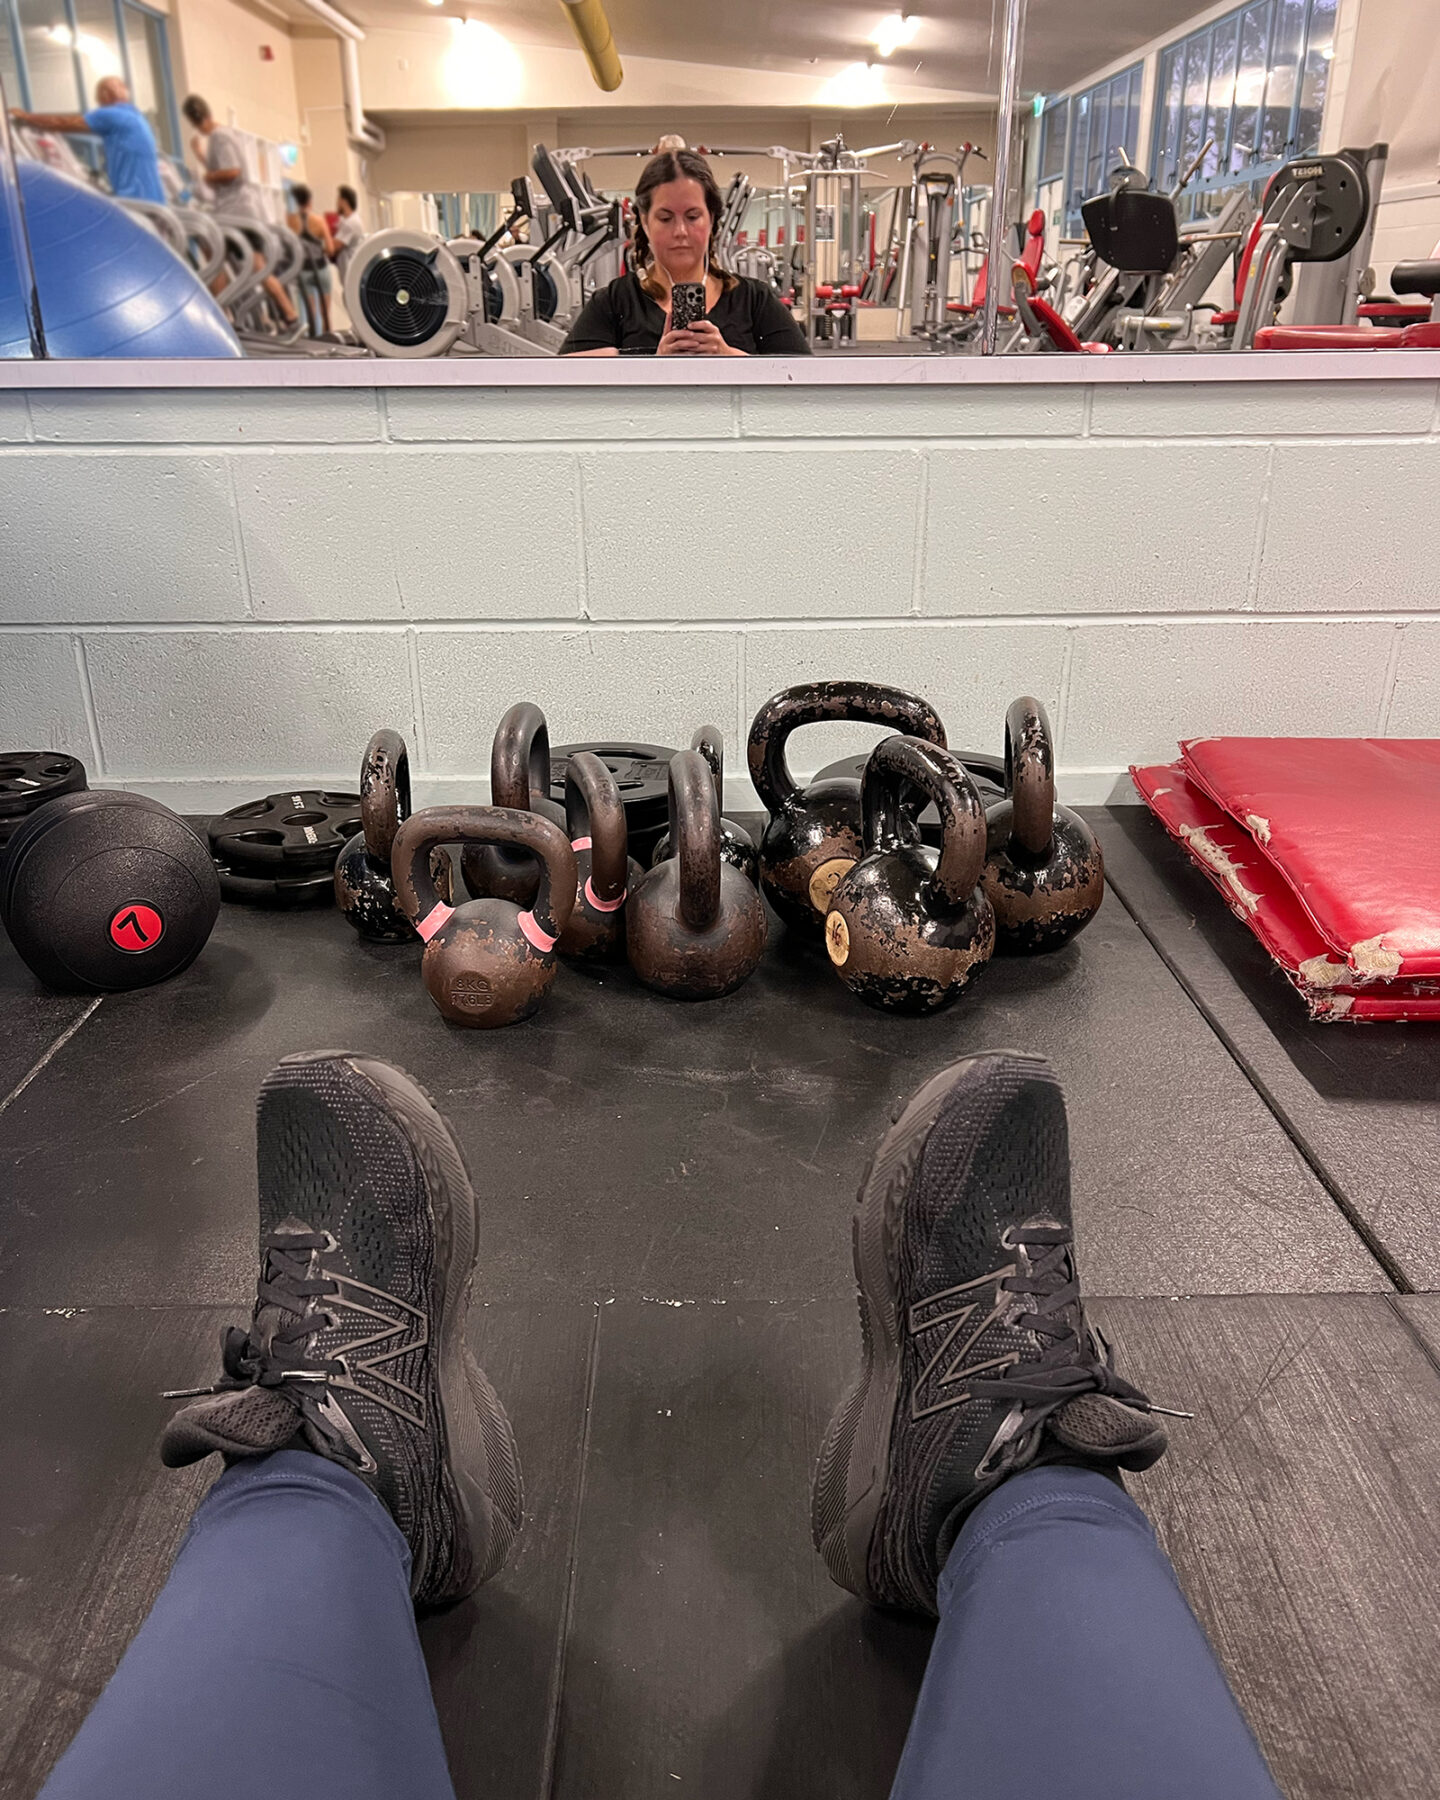 A fat Māori woman with lipoedema is sitting on the floor at the gym. She is taking a selfie in a mirror. Her feet are sticking out in front of her, and there are kettlebells piled on the floor between her and the mirror.